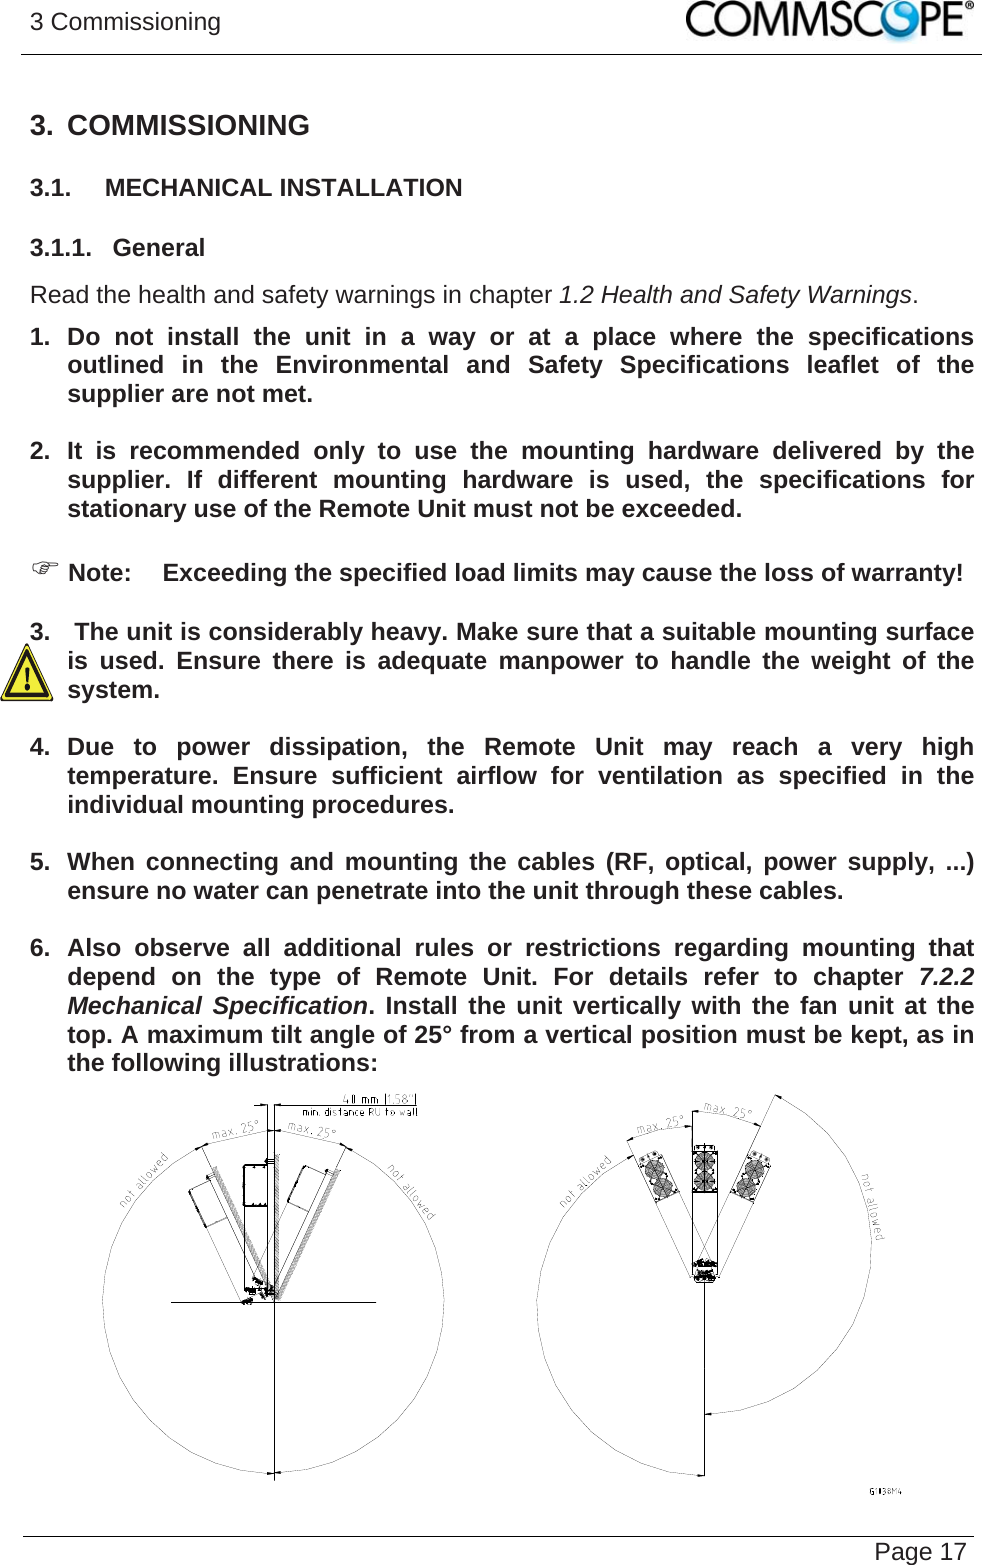 3 Commissioning   Page 173. COMMISSIONING 3.1.  MECHANICAL INSTALLATION 3.1.1.  General Read the health and safety warnings in chapter 1.2 Health and Safety Warnings. 1. Do not install the unit in a way or at a place where the specifications outlined in the Environmental and Safety Specifications leaflet of the supplier are not met.  2. It is recommended only to use the mounting hardware delivered by the supplier. If different mounting hardware is used, the specifications for stationary use of the Remote Unit must not be exceeded.  ) Note:  Exceeding the specified load limits may cause the loss of warranty!  3.   The unit is considerably heavy. Make sure that a suitable mounting surface is used. Ensure there is adequate manpower to handle the weight of the system.  4. Due to power dissipation, the Remote Unit may reach a very high temperature. Ensure sufficient airflow for ventilation as specified in the individual mounting procedures.  5.  When connecting and mounting the cables (RF, optical, power supply, ...) ensure no water can penetrate into the unit through these cables.  6. Also observe all additional rules or restrictions regarding mounting that depend on the type of Remote Unit. For details refer to chapter 7.2.2 Mechanical Specification. Install the unit vertically with the fan unit at the top. A maximum tilt angle of 25° from a vertical position must be kept, as in the following illustrations:   